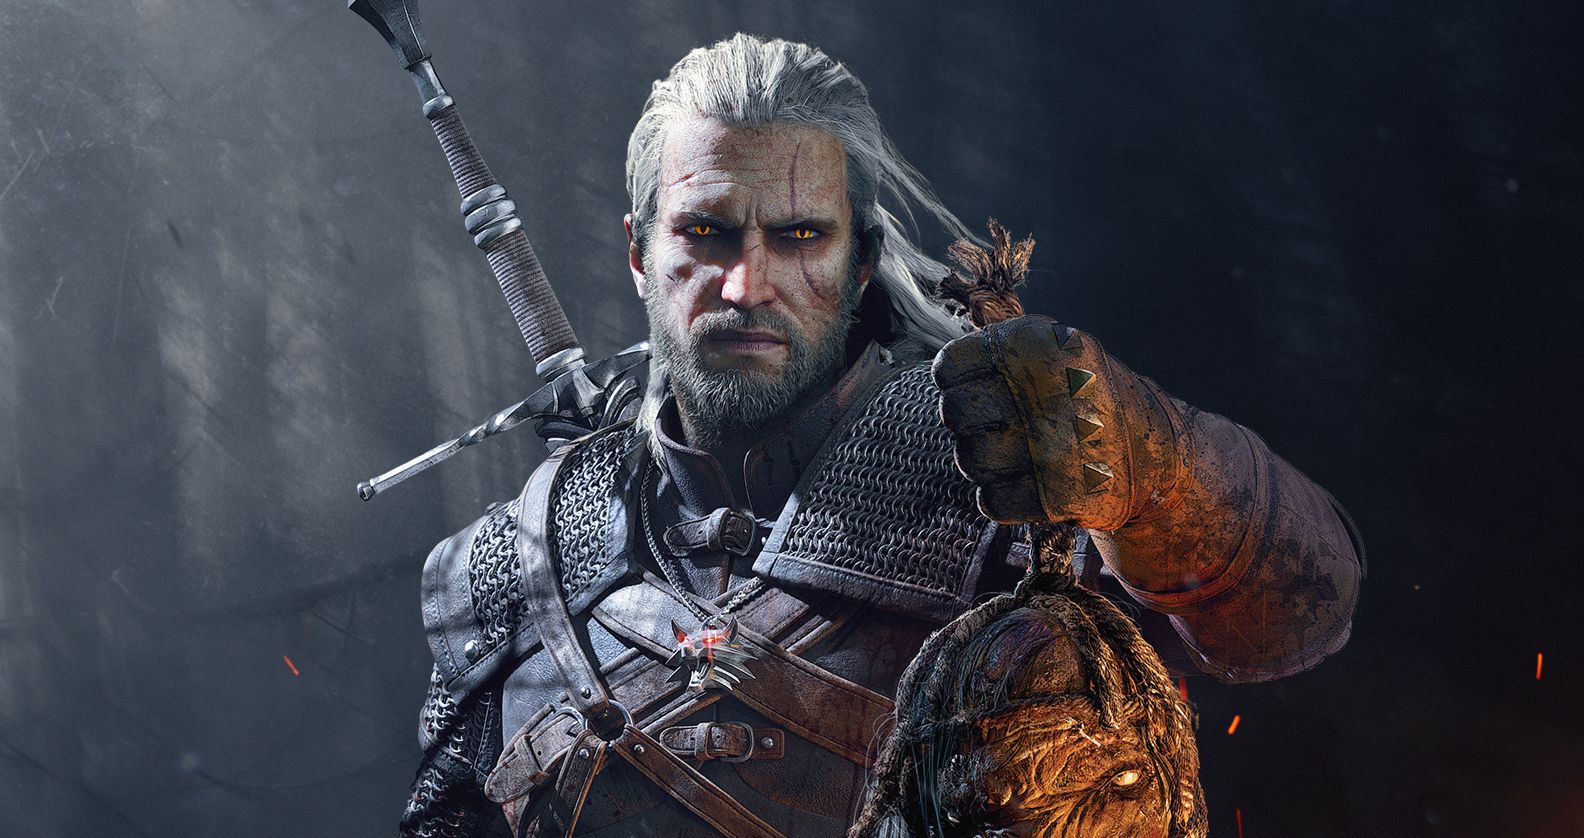 Image for The Witcher Netflix series showrunner reveals show's first possible characters